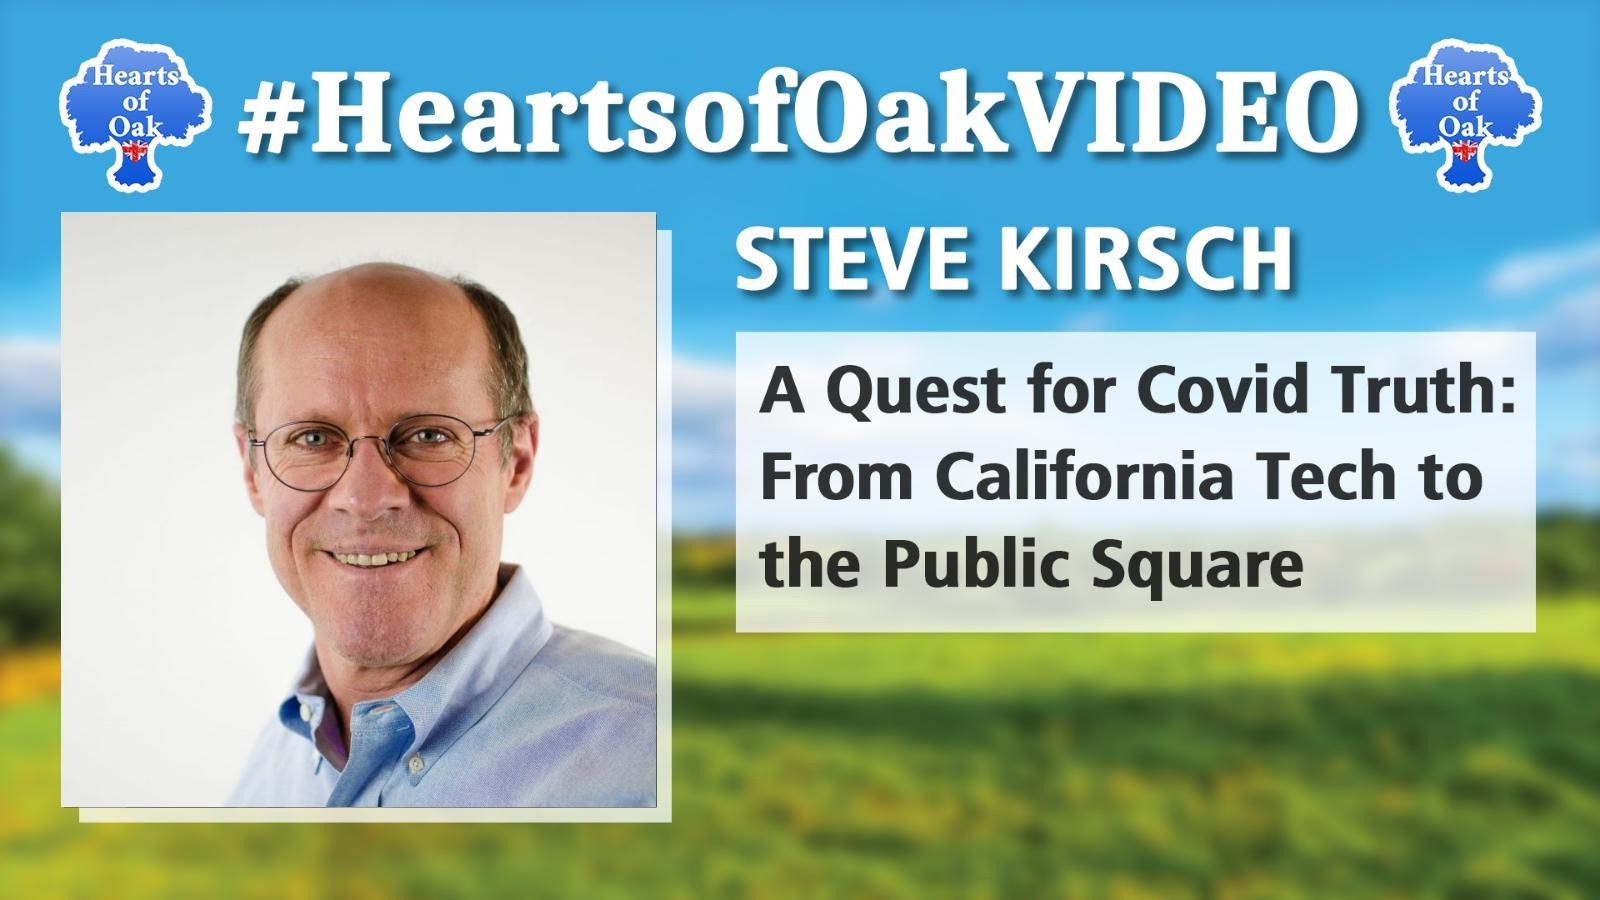 Steve Kirsch - Quest for Covid Truth: From California Tech to the Public Square